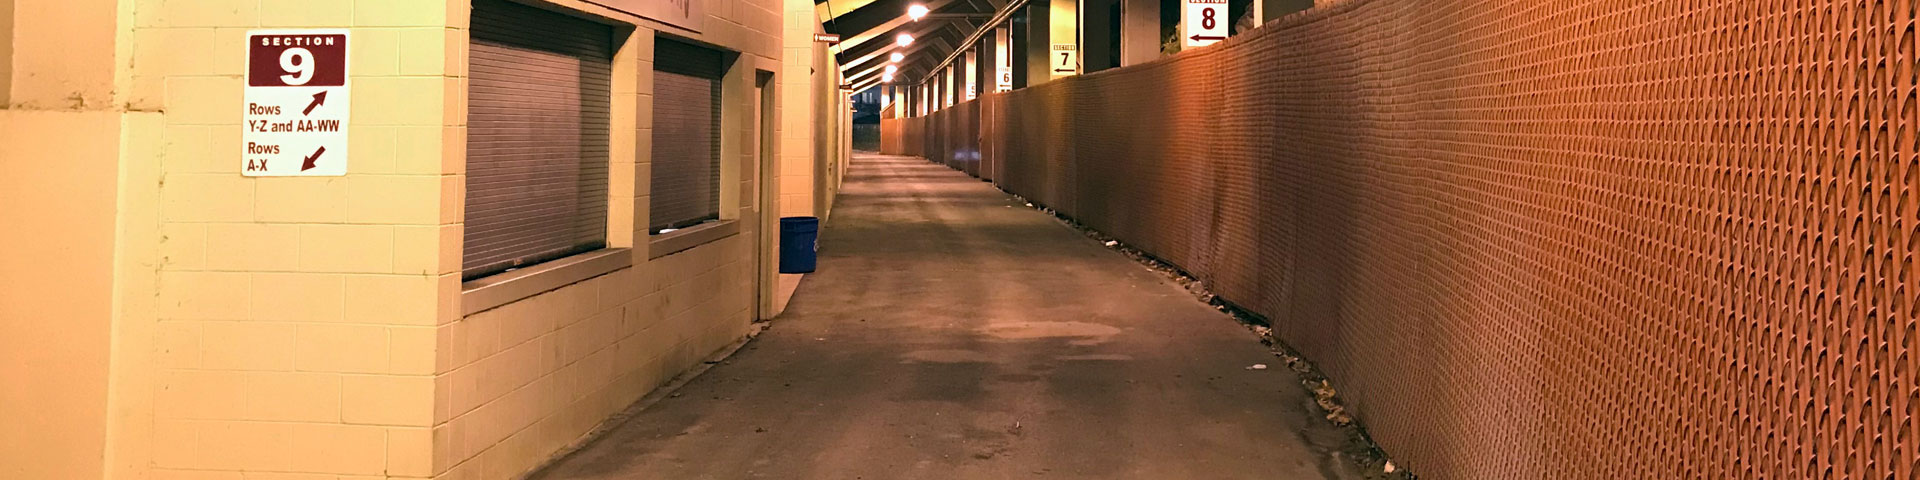 The passageway underneath the stadium seating. A chainlink fence is on the right; closed and shuttered food service areas are on the left.